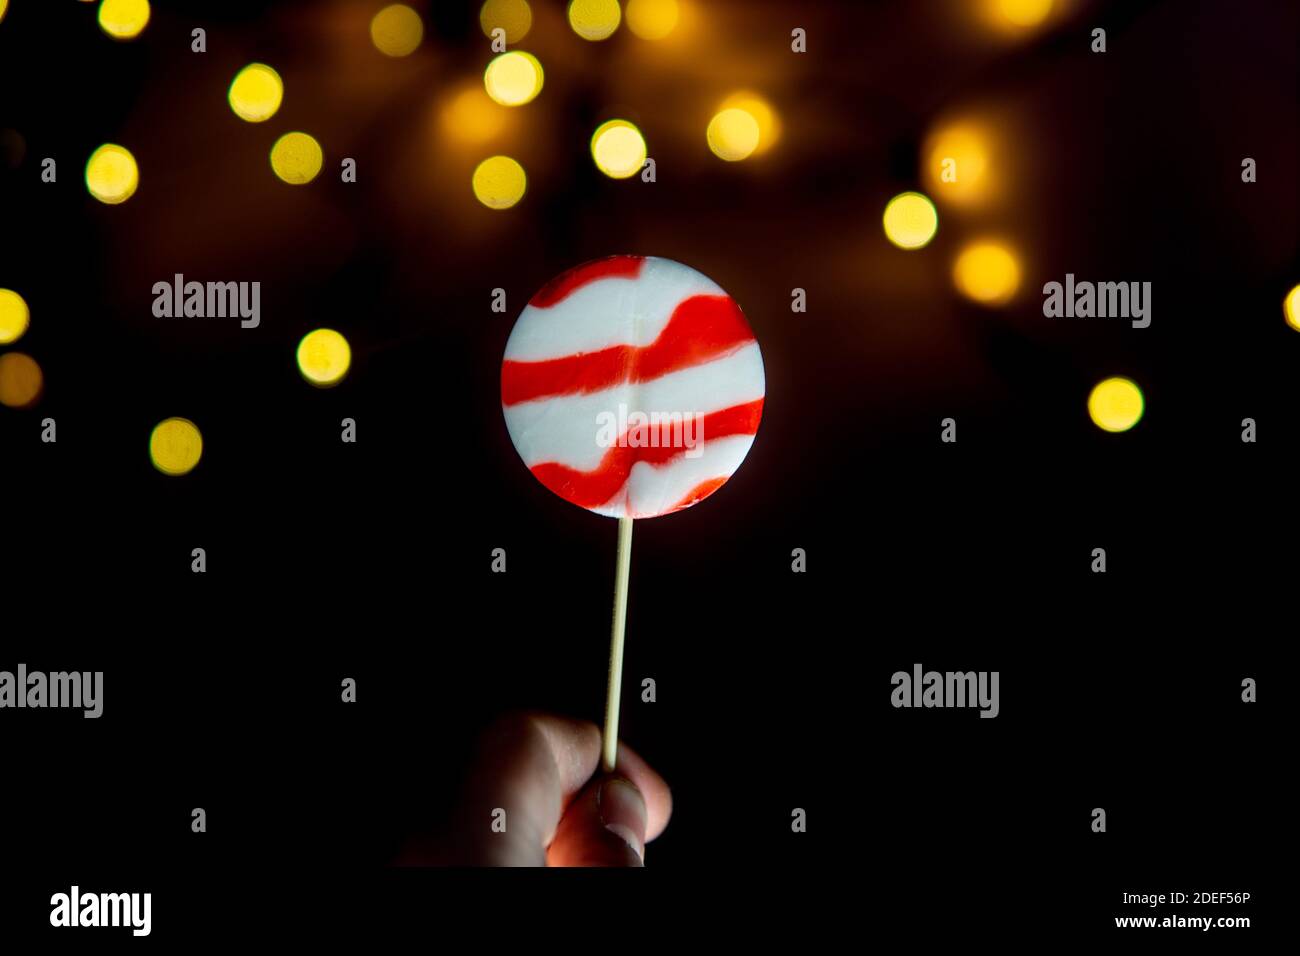 Red and white lollipop in hand in front of light bubbles. Minimal Christmas concept Stock Photo